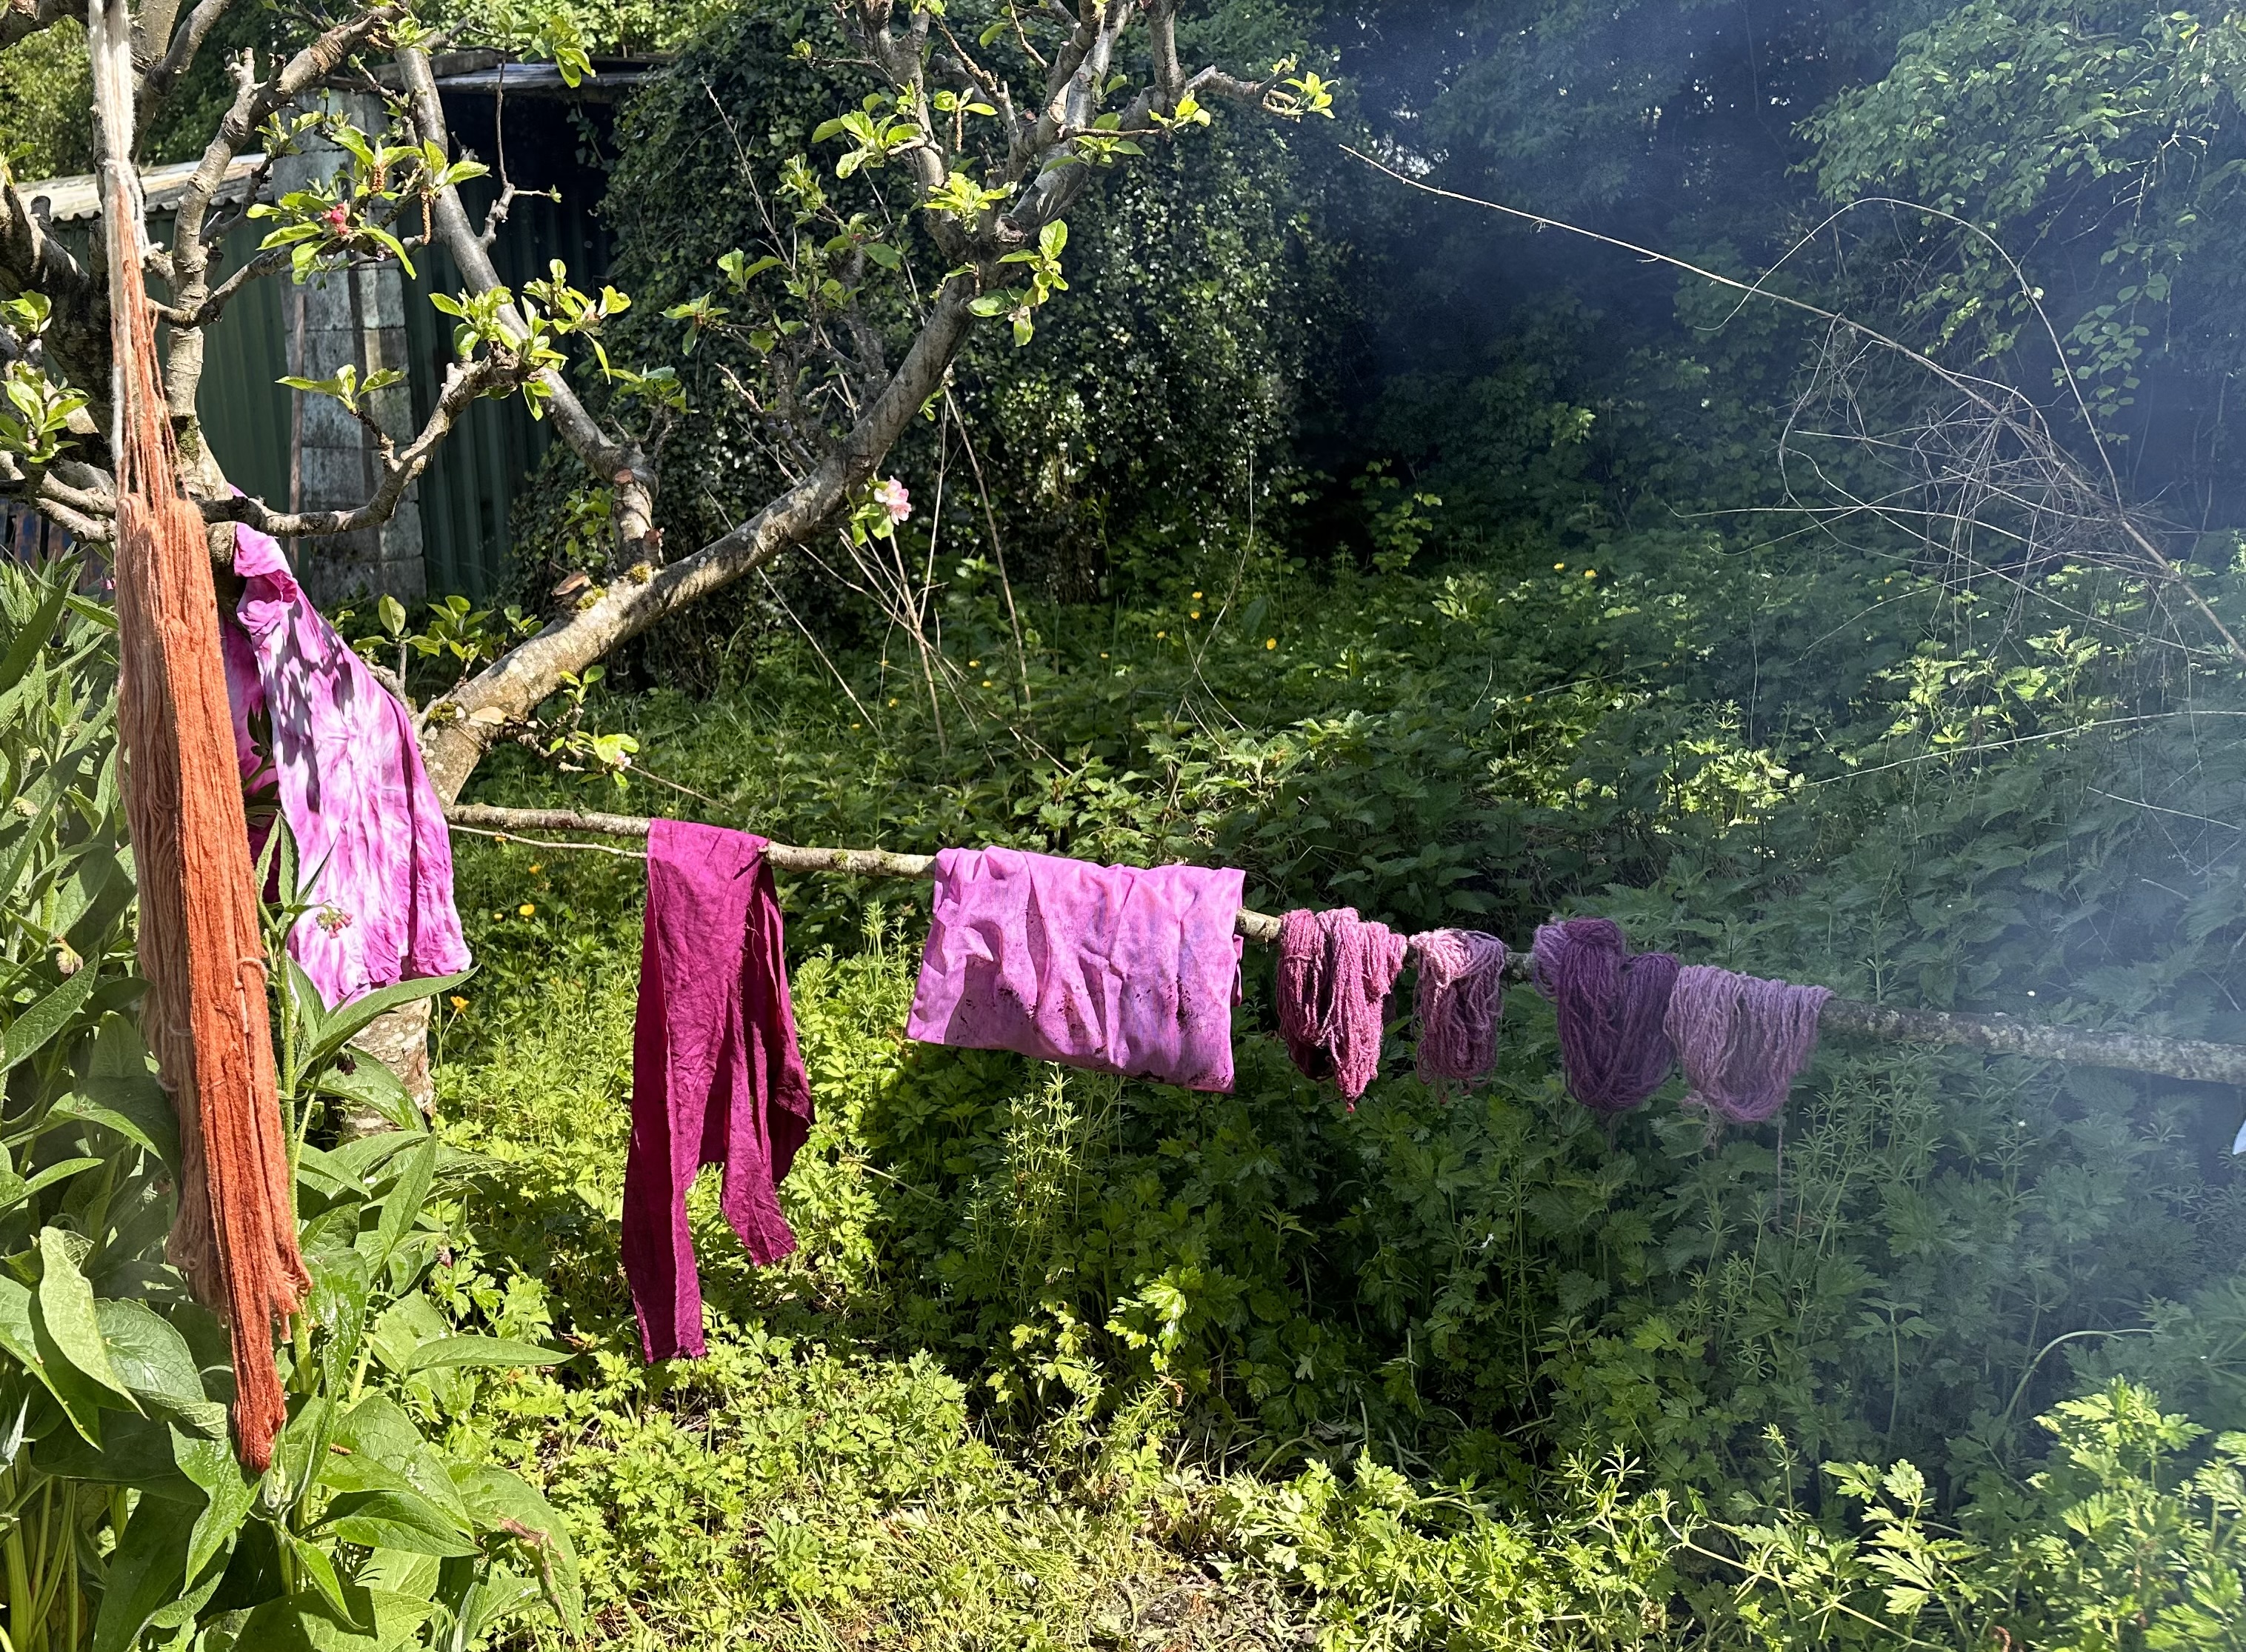 Fabric and yarn are draped over a tree branch to dry. They are dyed brown and pink.